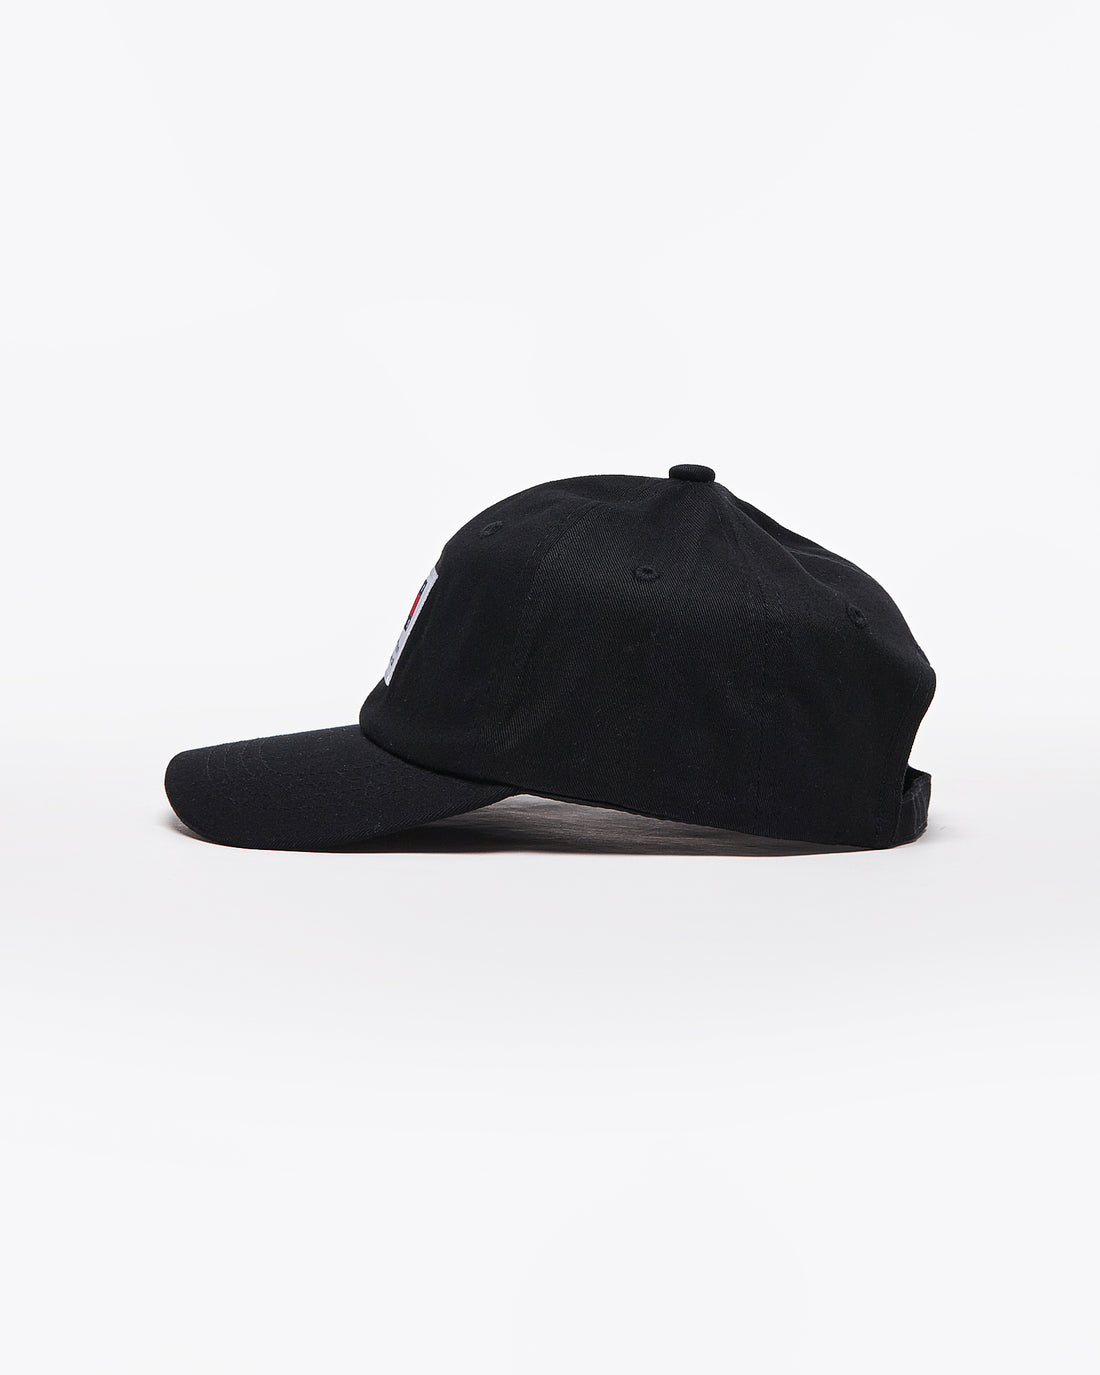 TH Logo Embroidered Black Cap 11.50